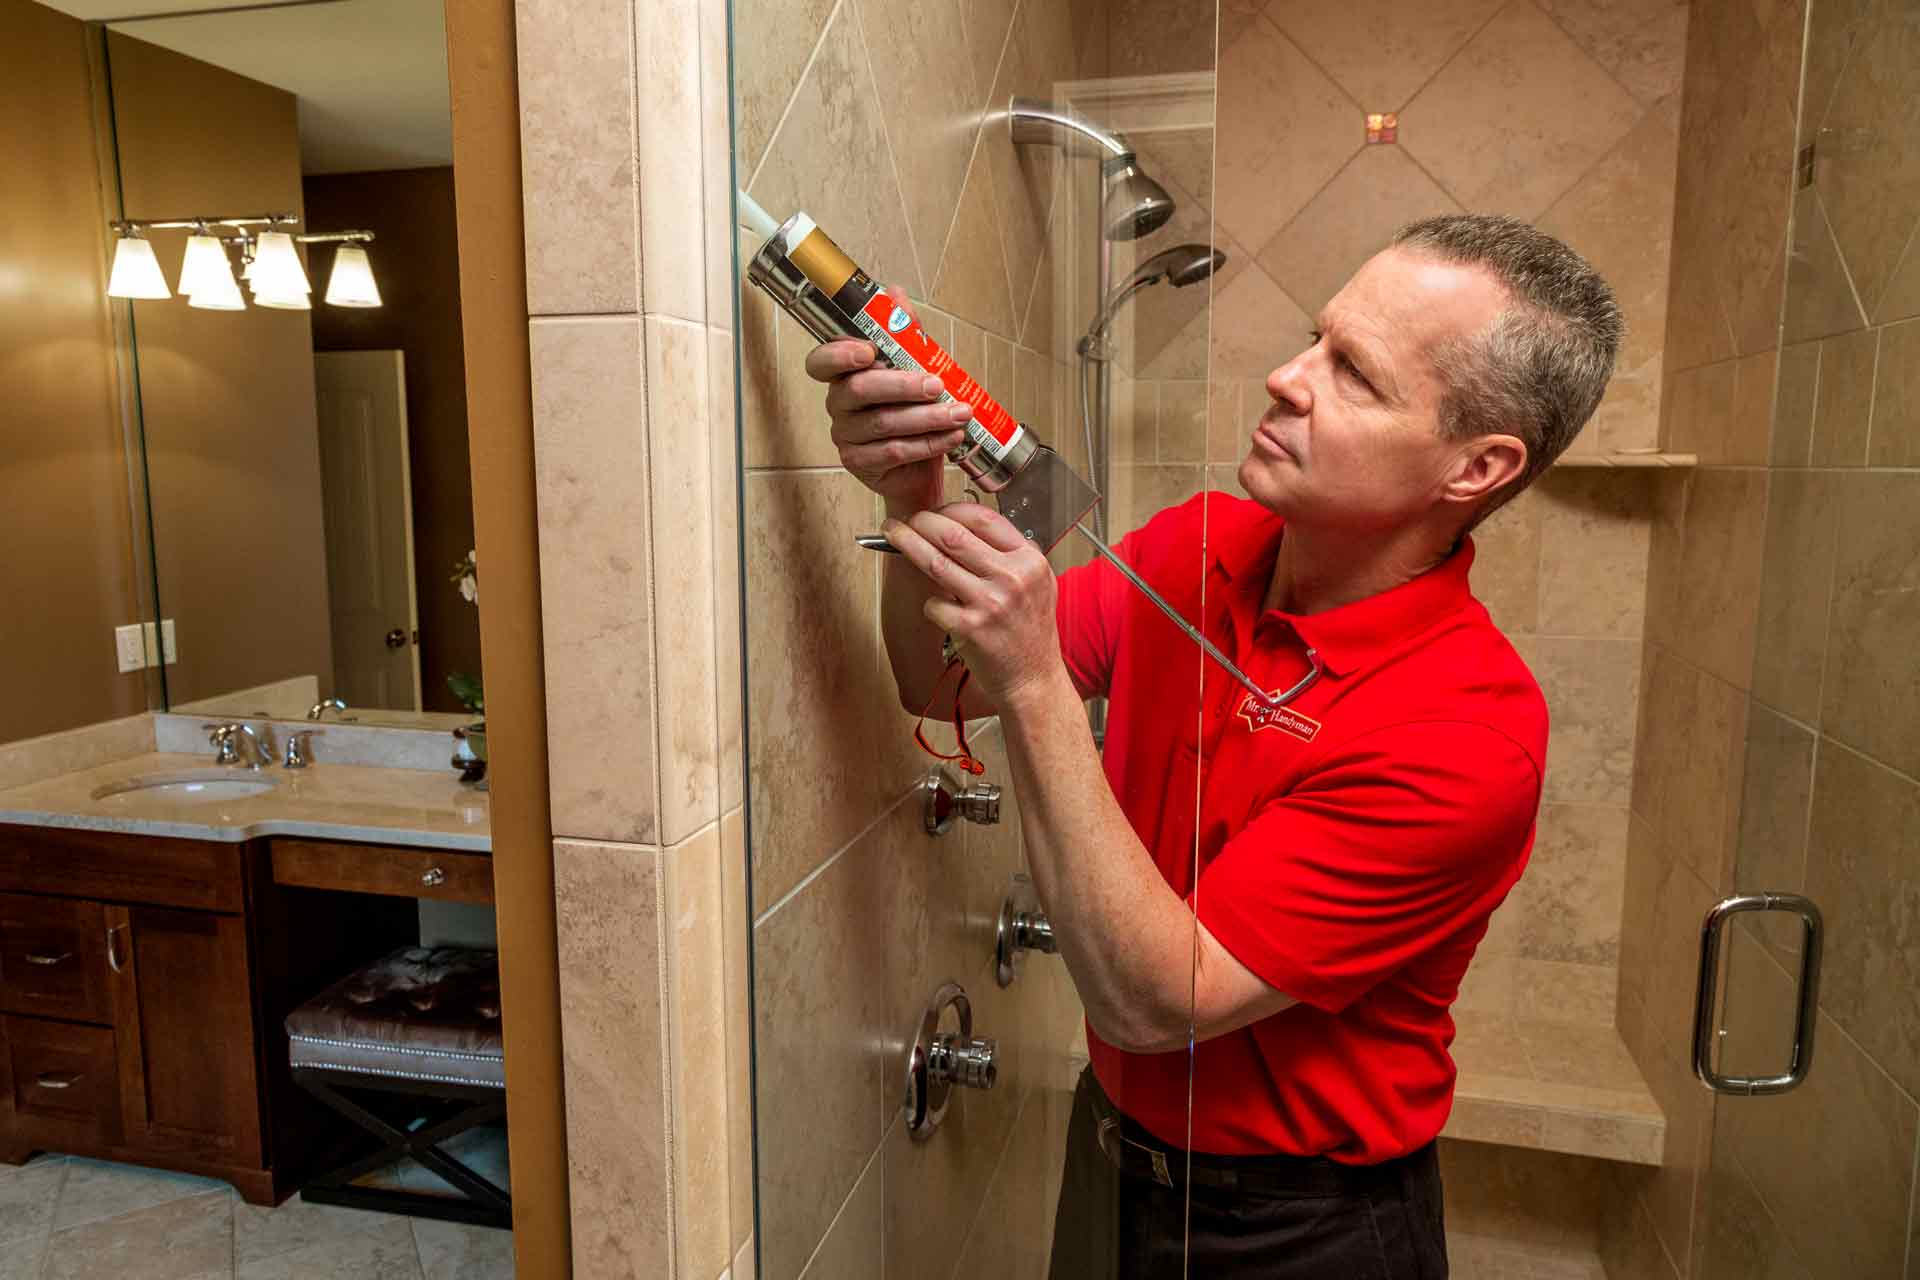 A handyman from Mr. Handyman using a caulking gun to seal the glass wall of a shower during a bathroom remodel in Vancouver, WA.